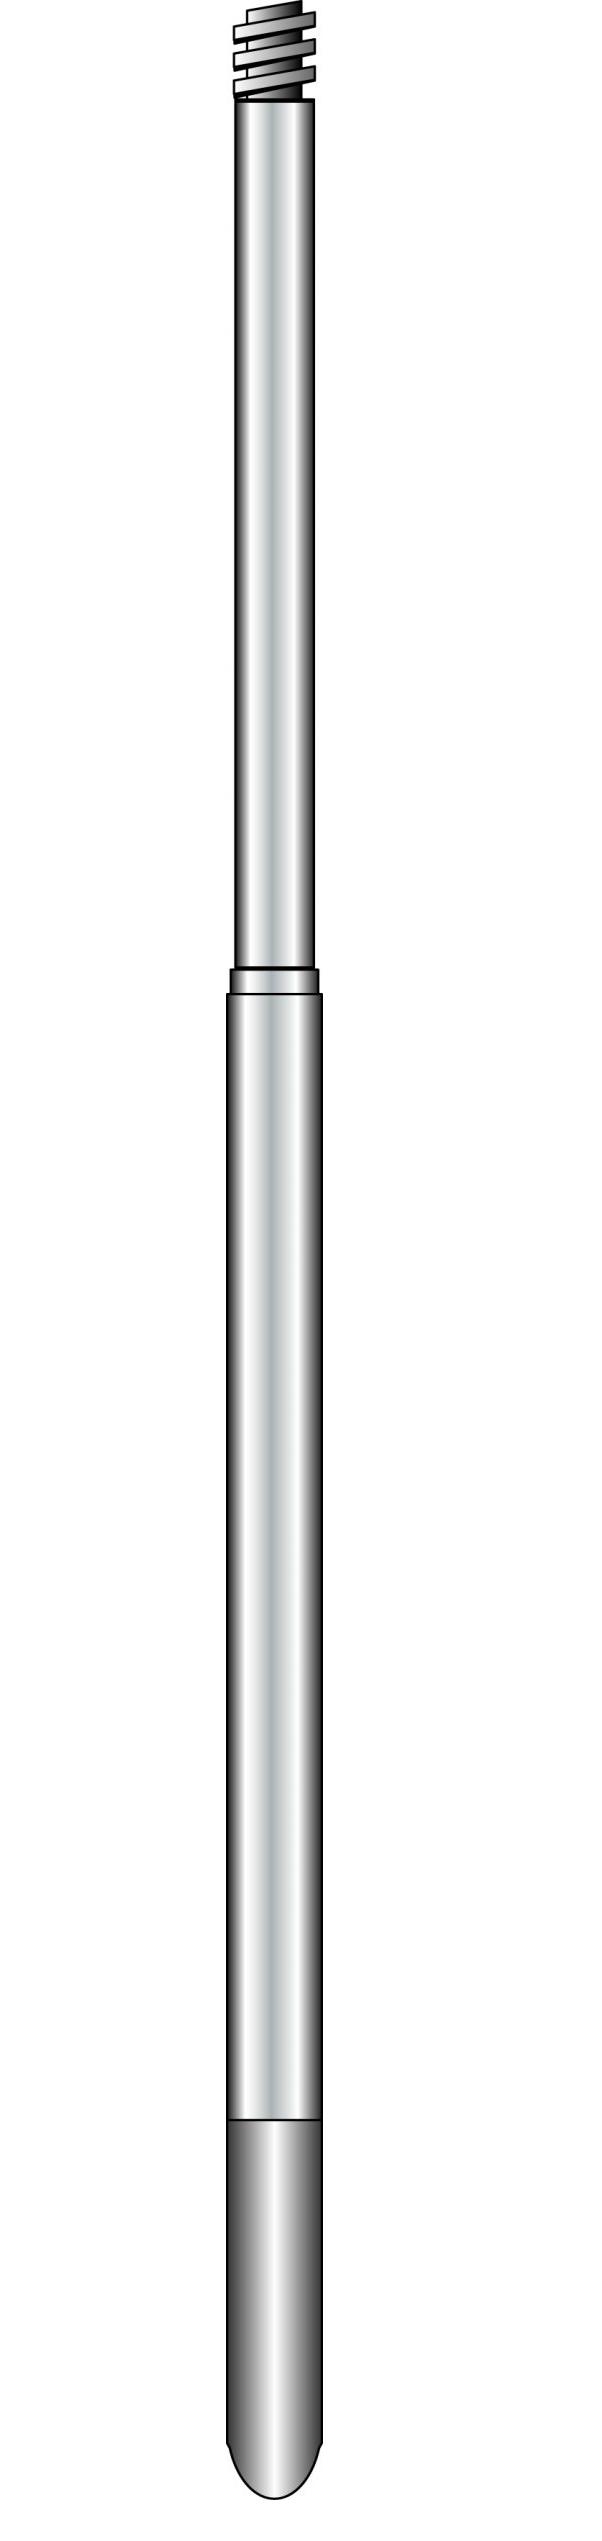 12ft Atlas Graham® 3-Section Twist-Lock Extension Pole,for Squeegee